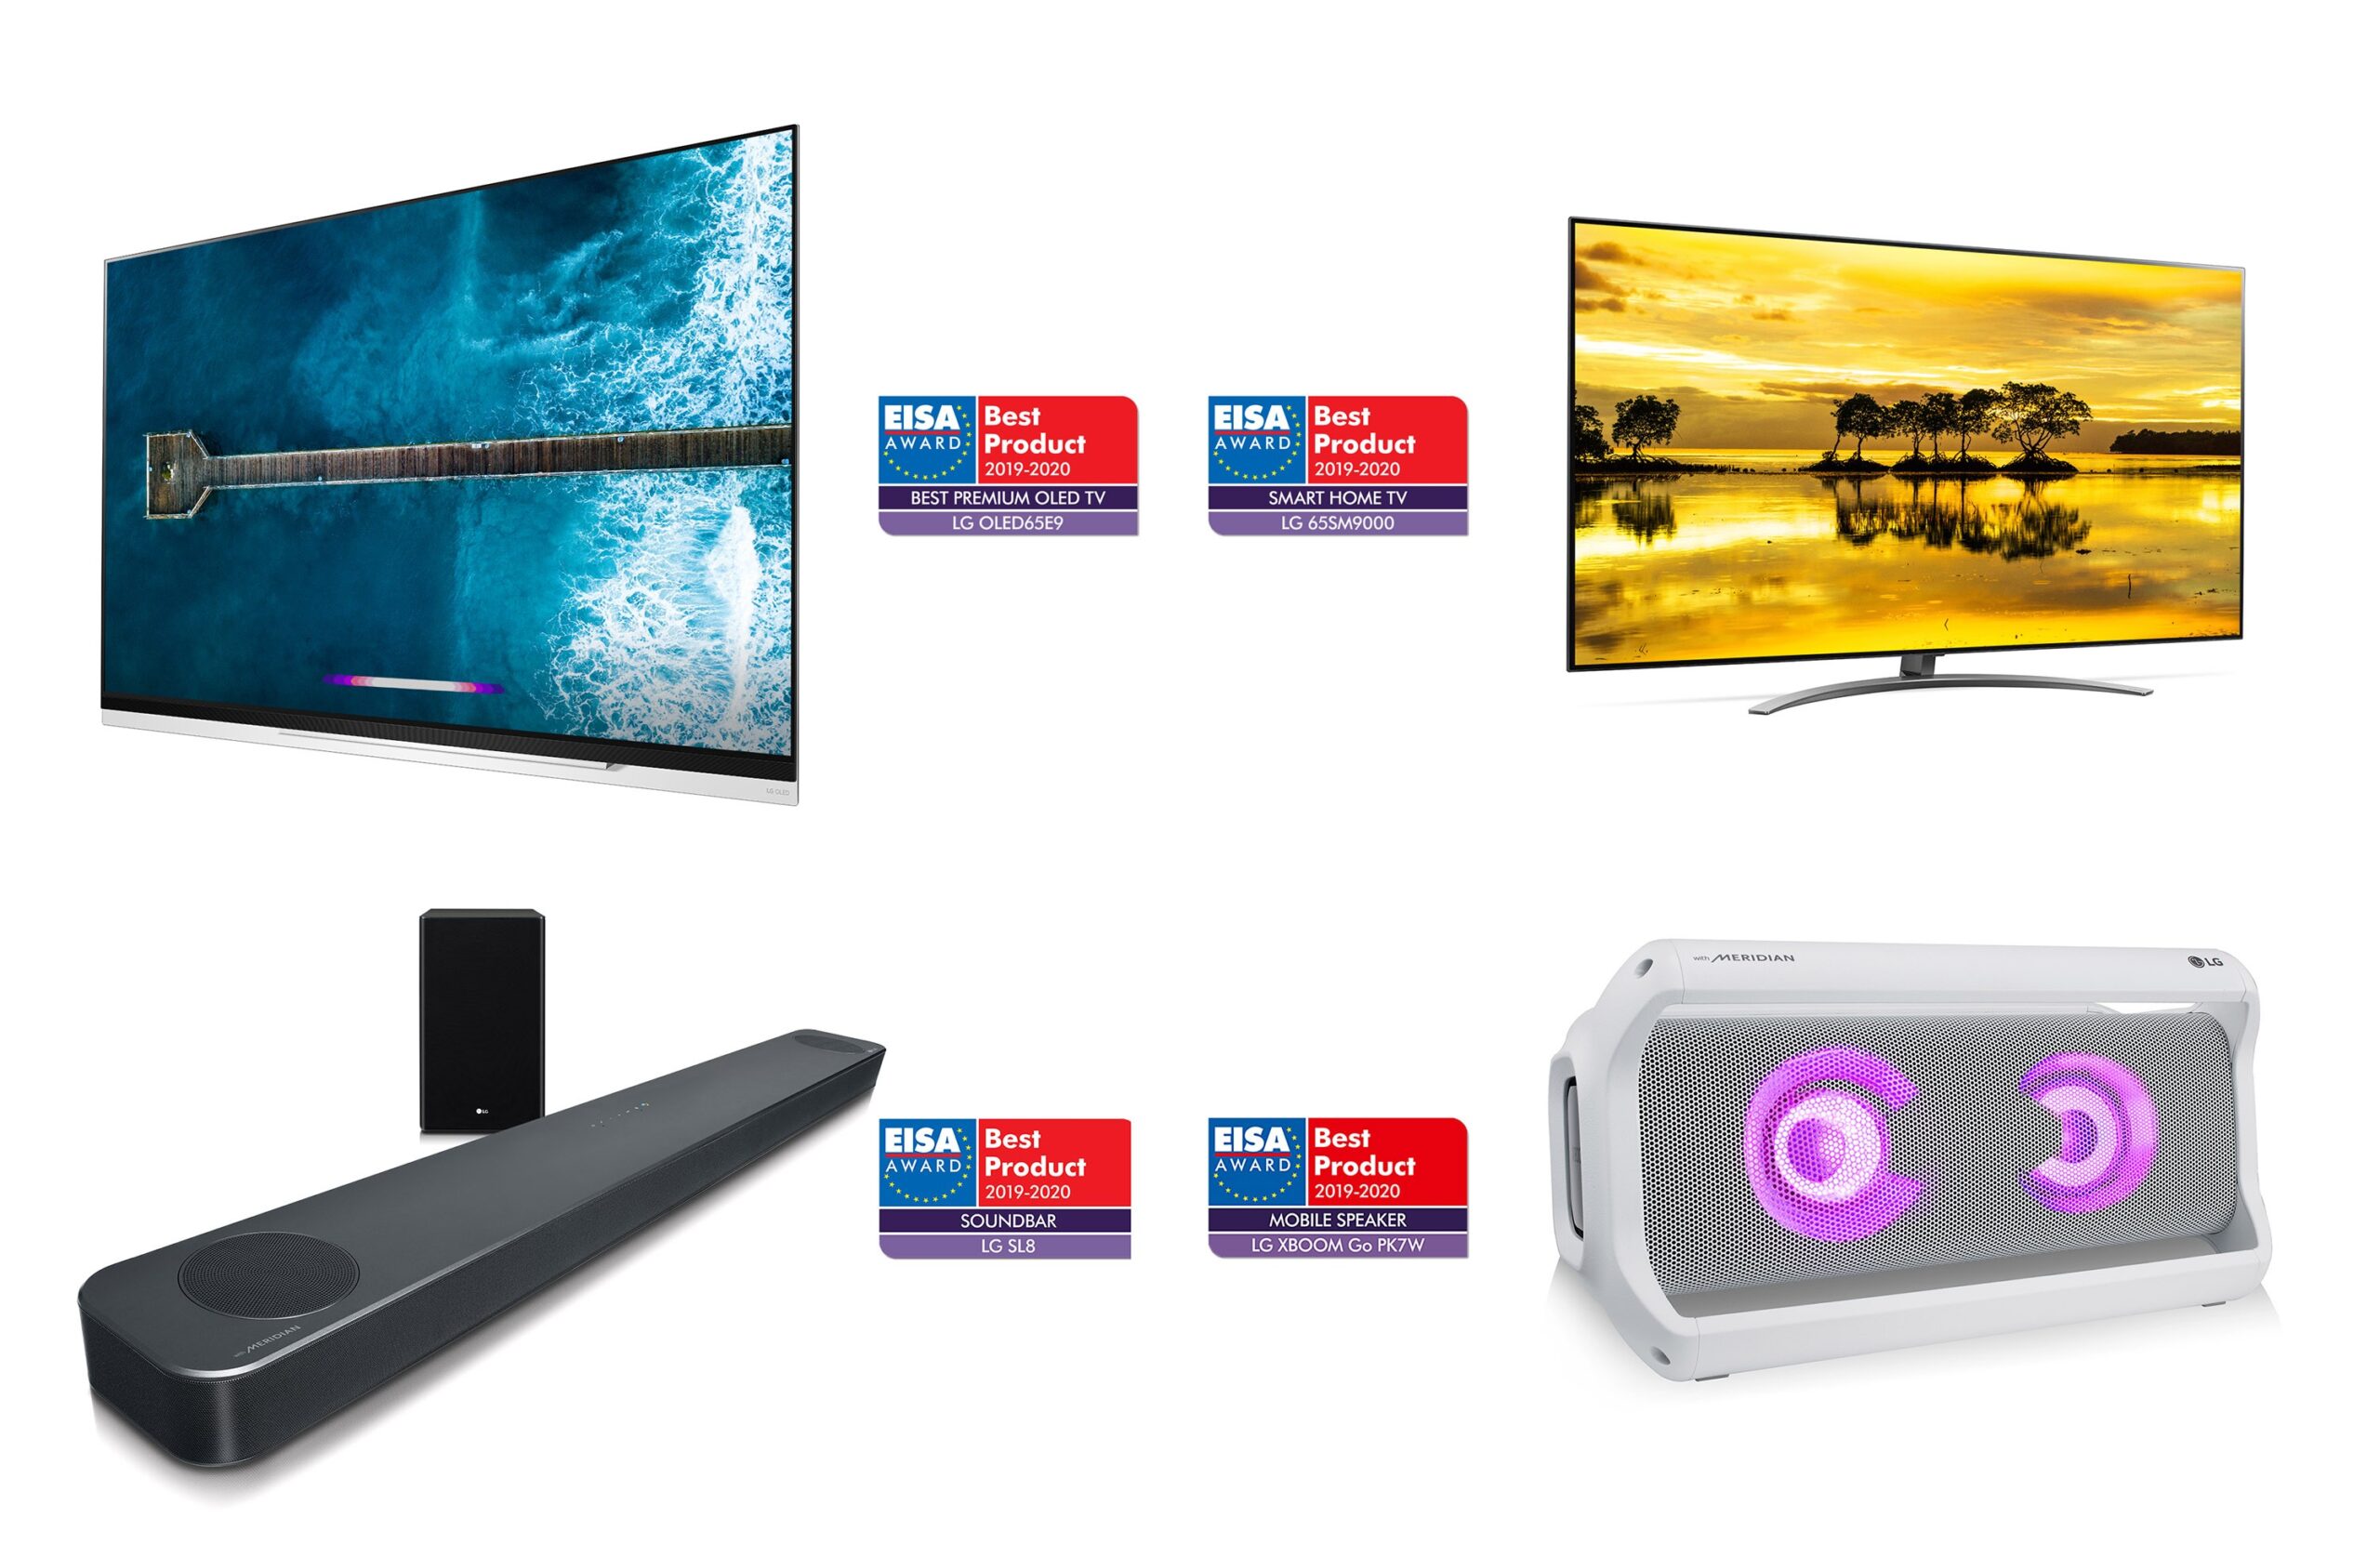 LG’s AI-enabled products including the LG OLED TV model OLED65E9 and LG NanoCell TV model 65SM9000 on top, and the LG Soundbar model SL8YG and LG XBOOM Go model PK7 at the bottom, with the corresponding EISA Award logo at each product’s side